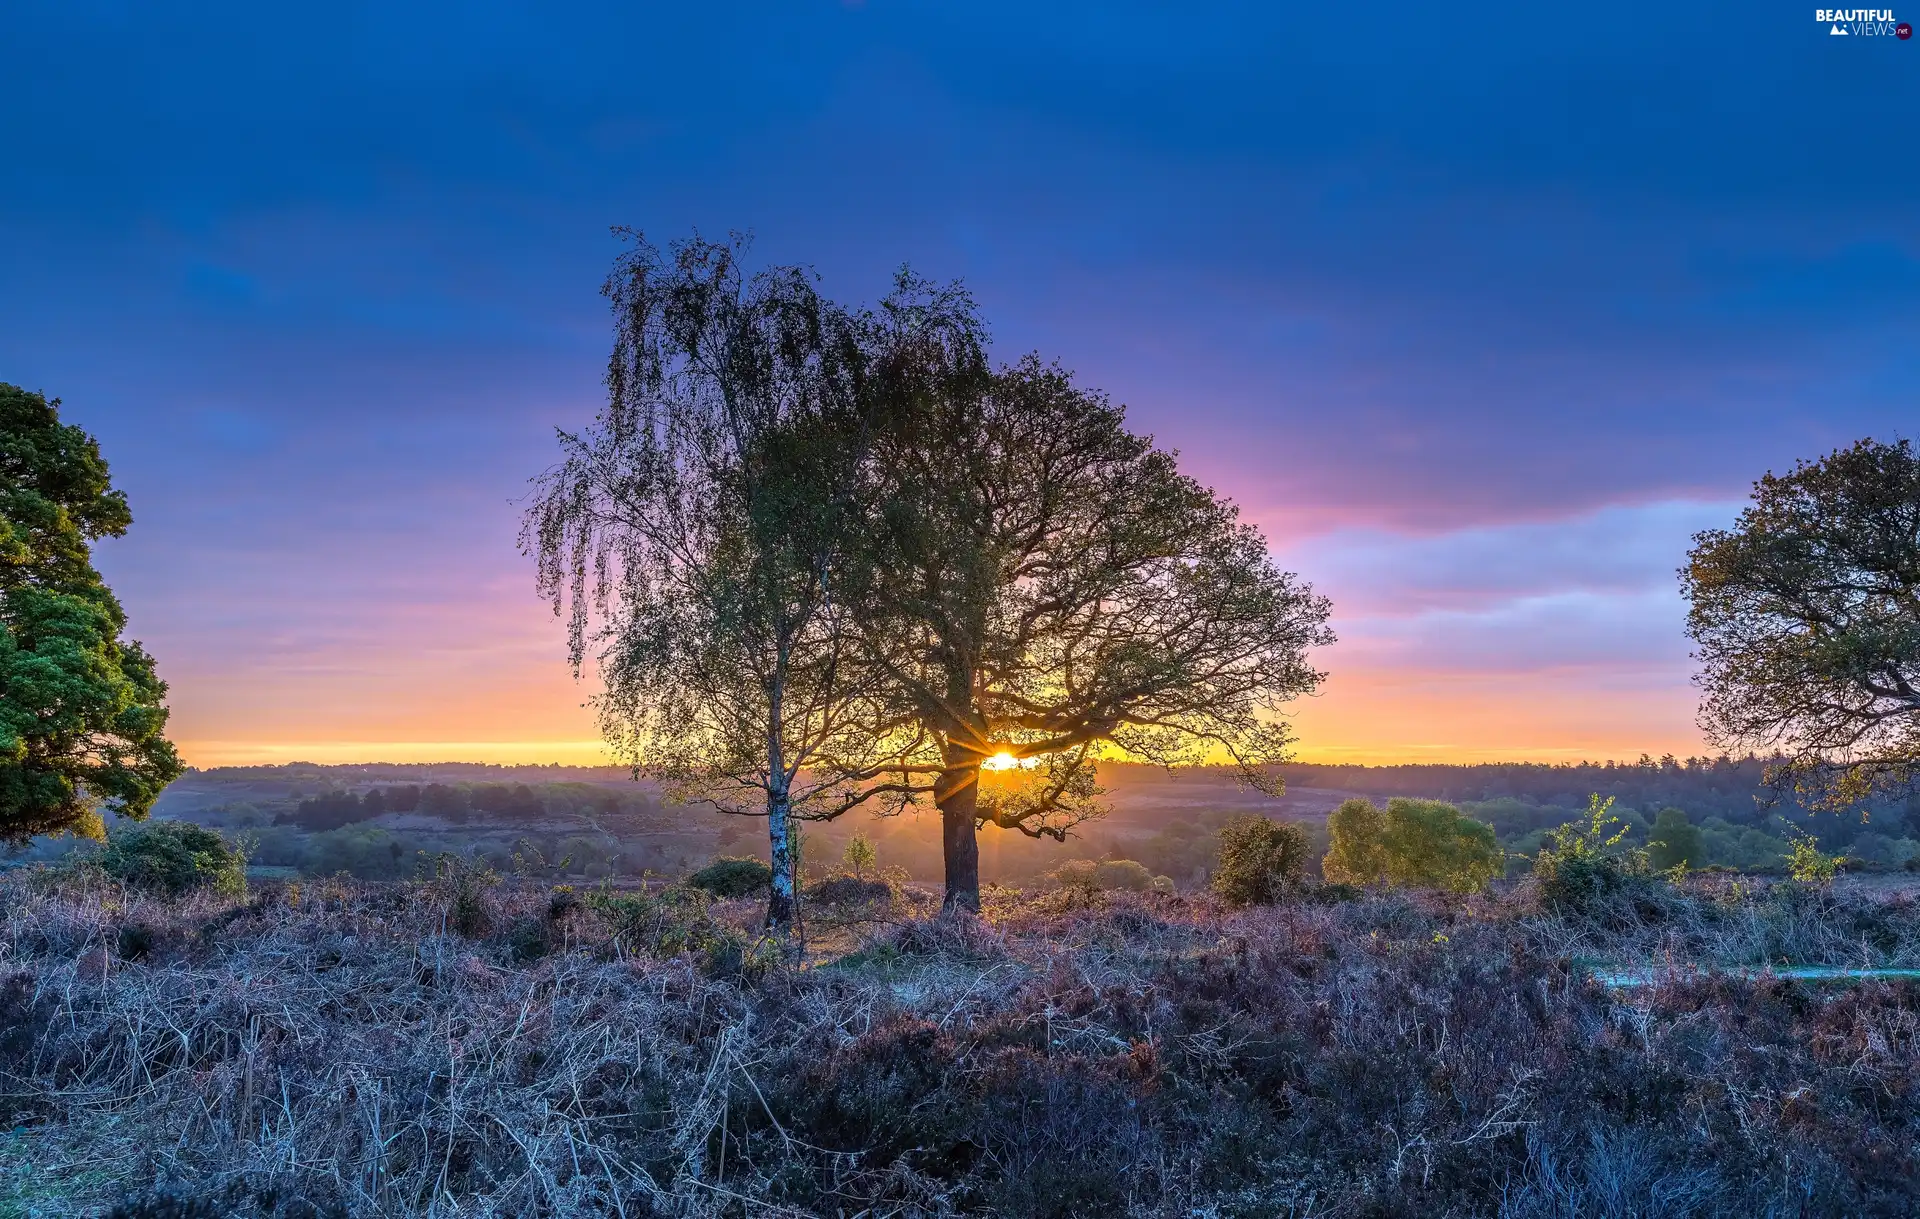 Hampshire County, Rockford Settlement, Sunrise, heath, viewes, New Forest National Park, England, trees